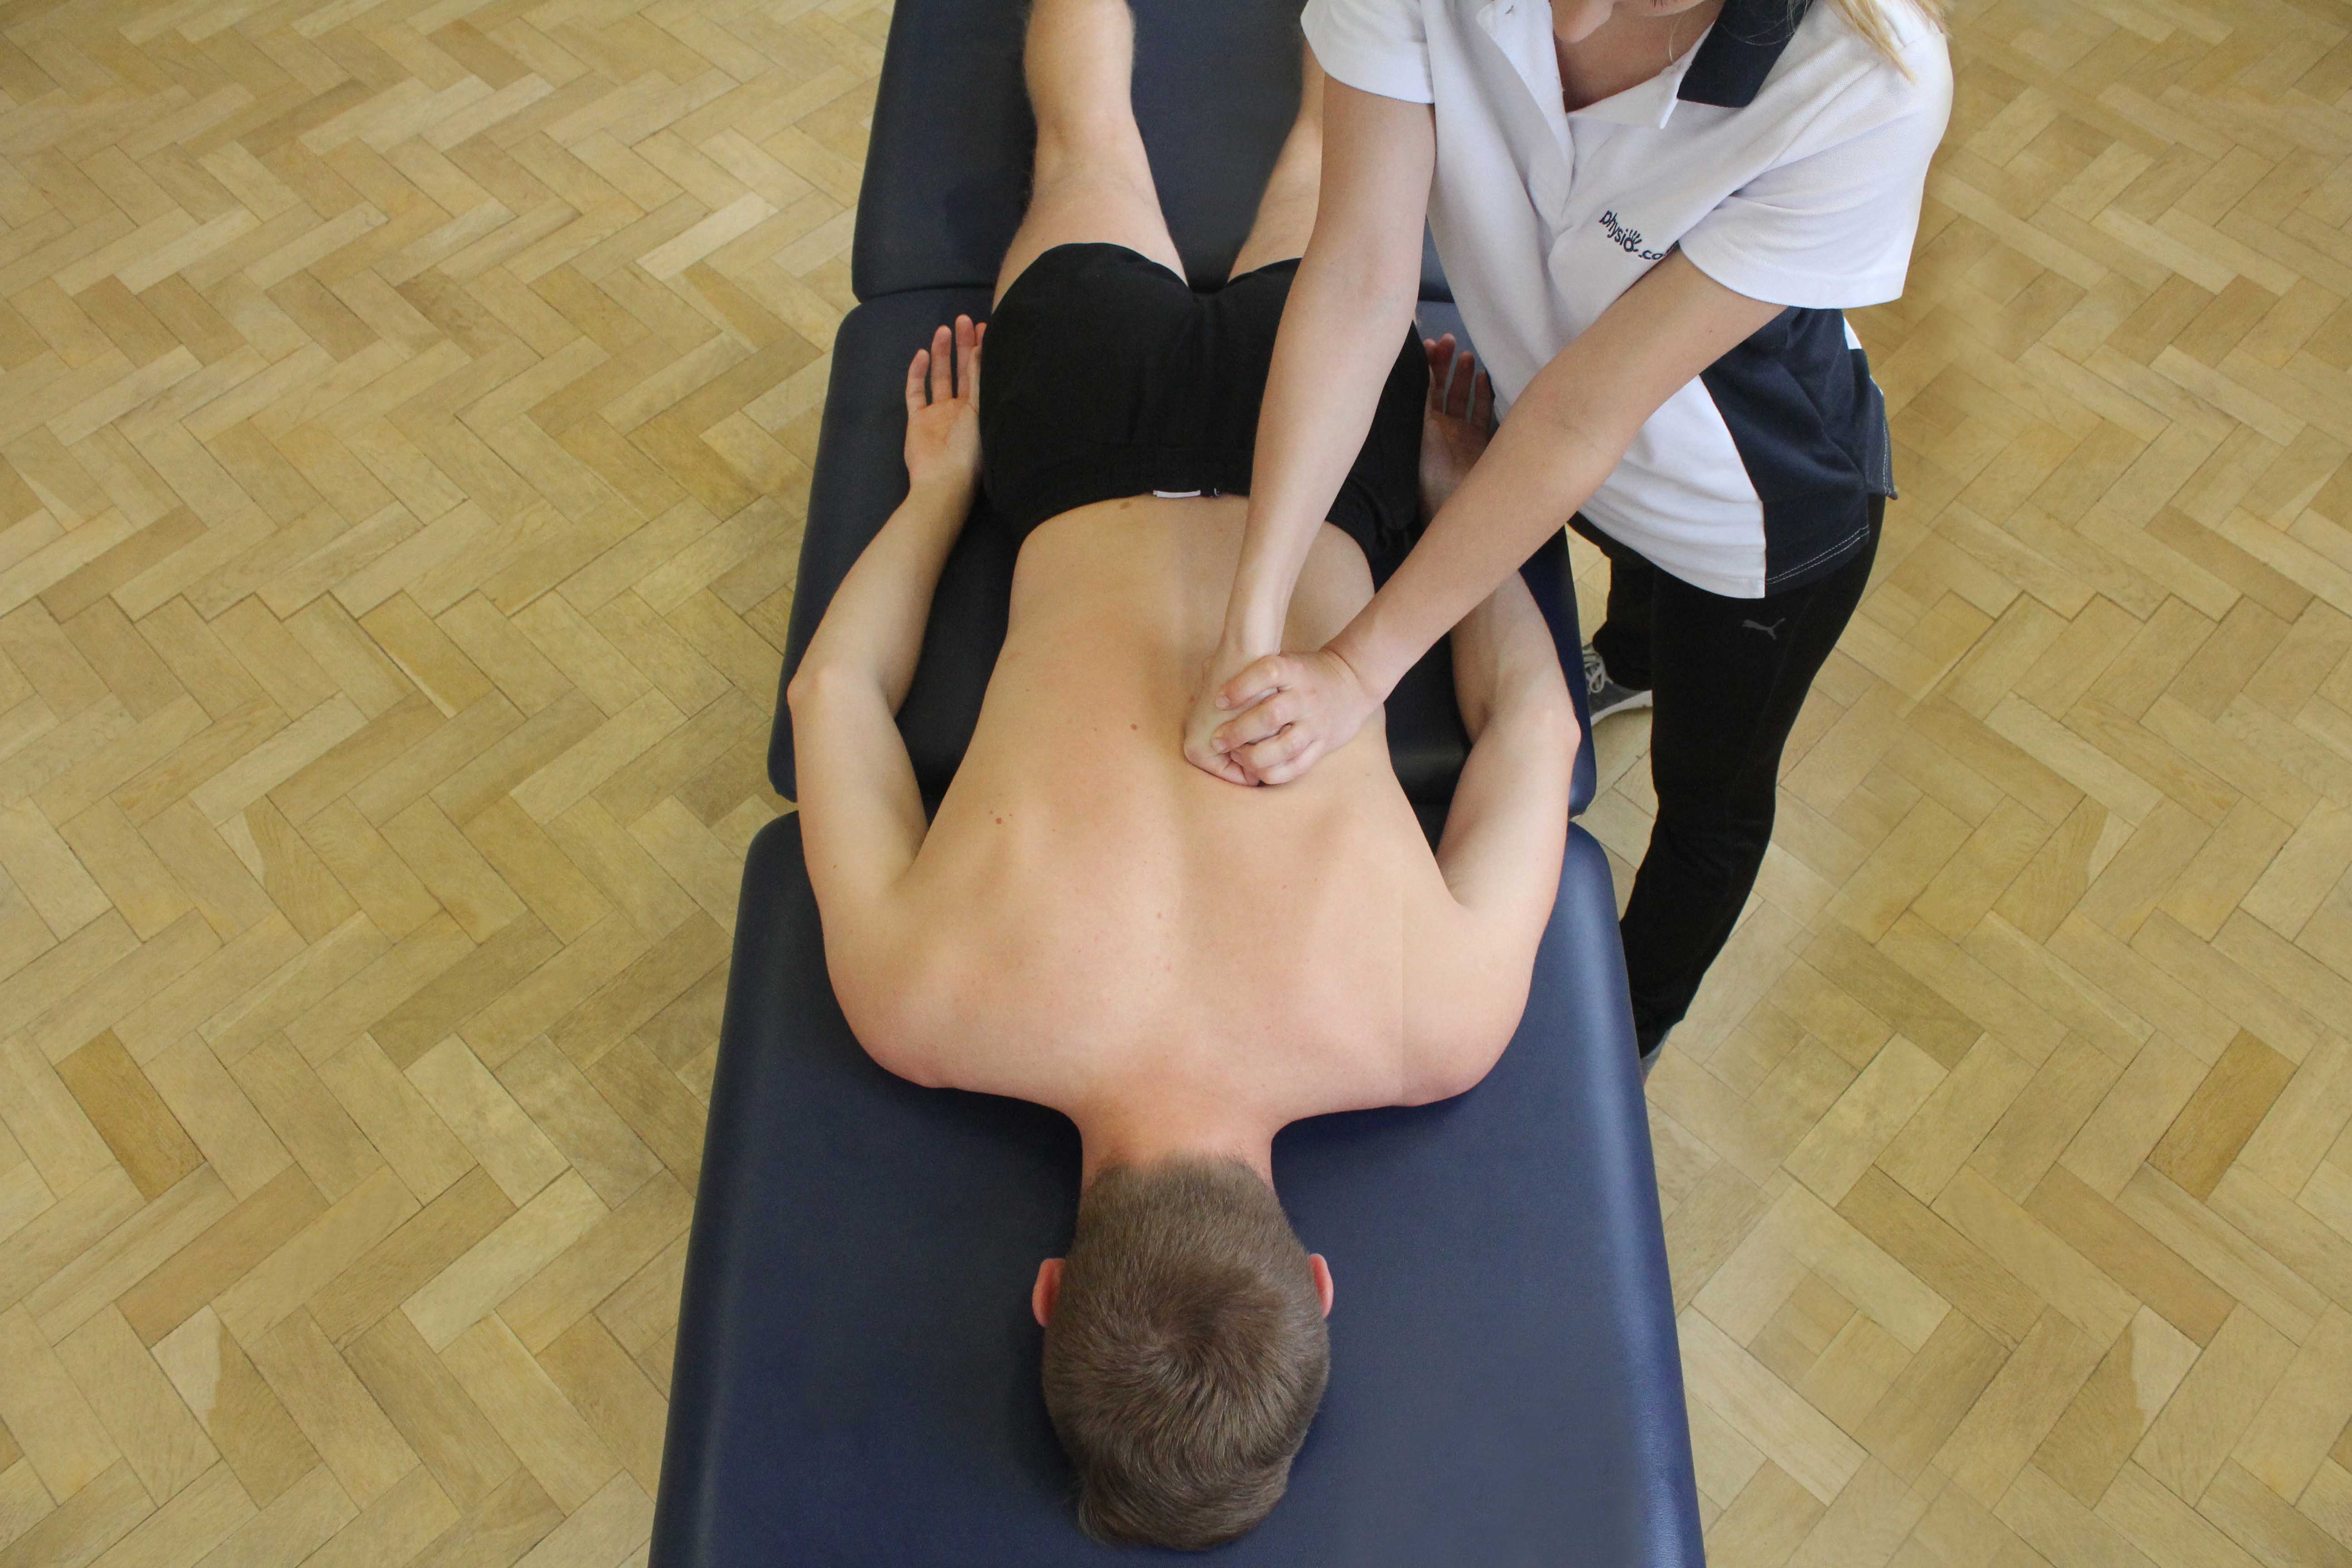 Kneading massage technique applied to Latissimus dorsi and erector spinae muscles